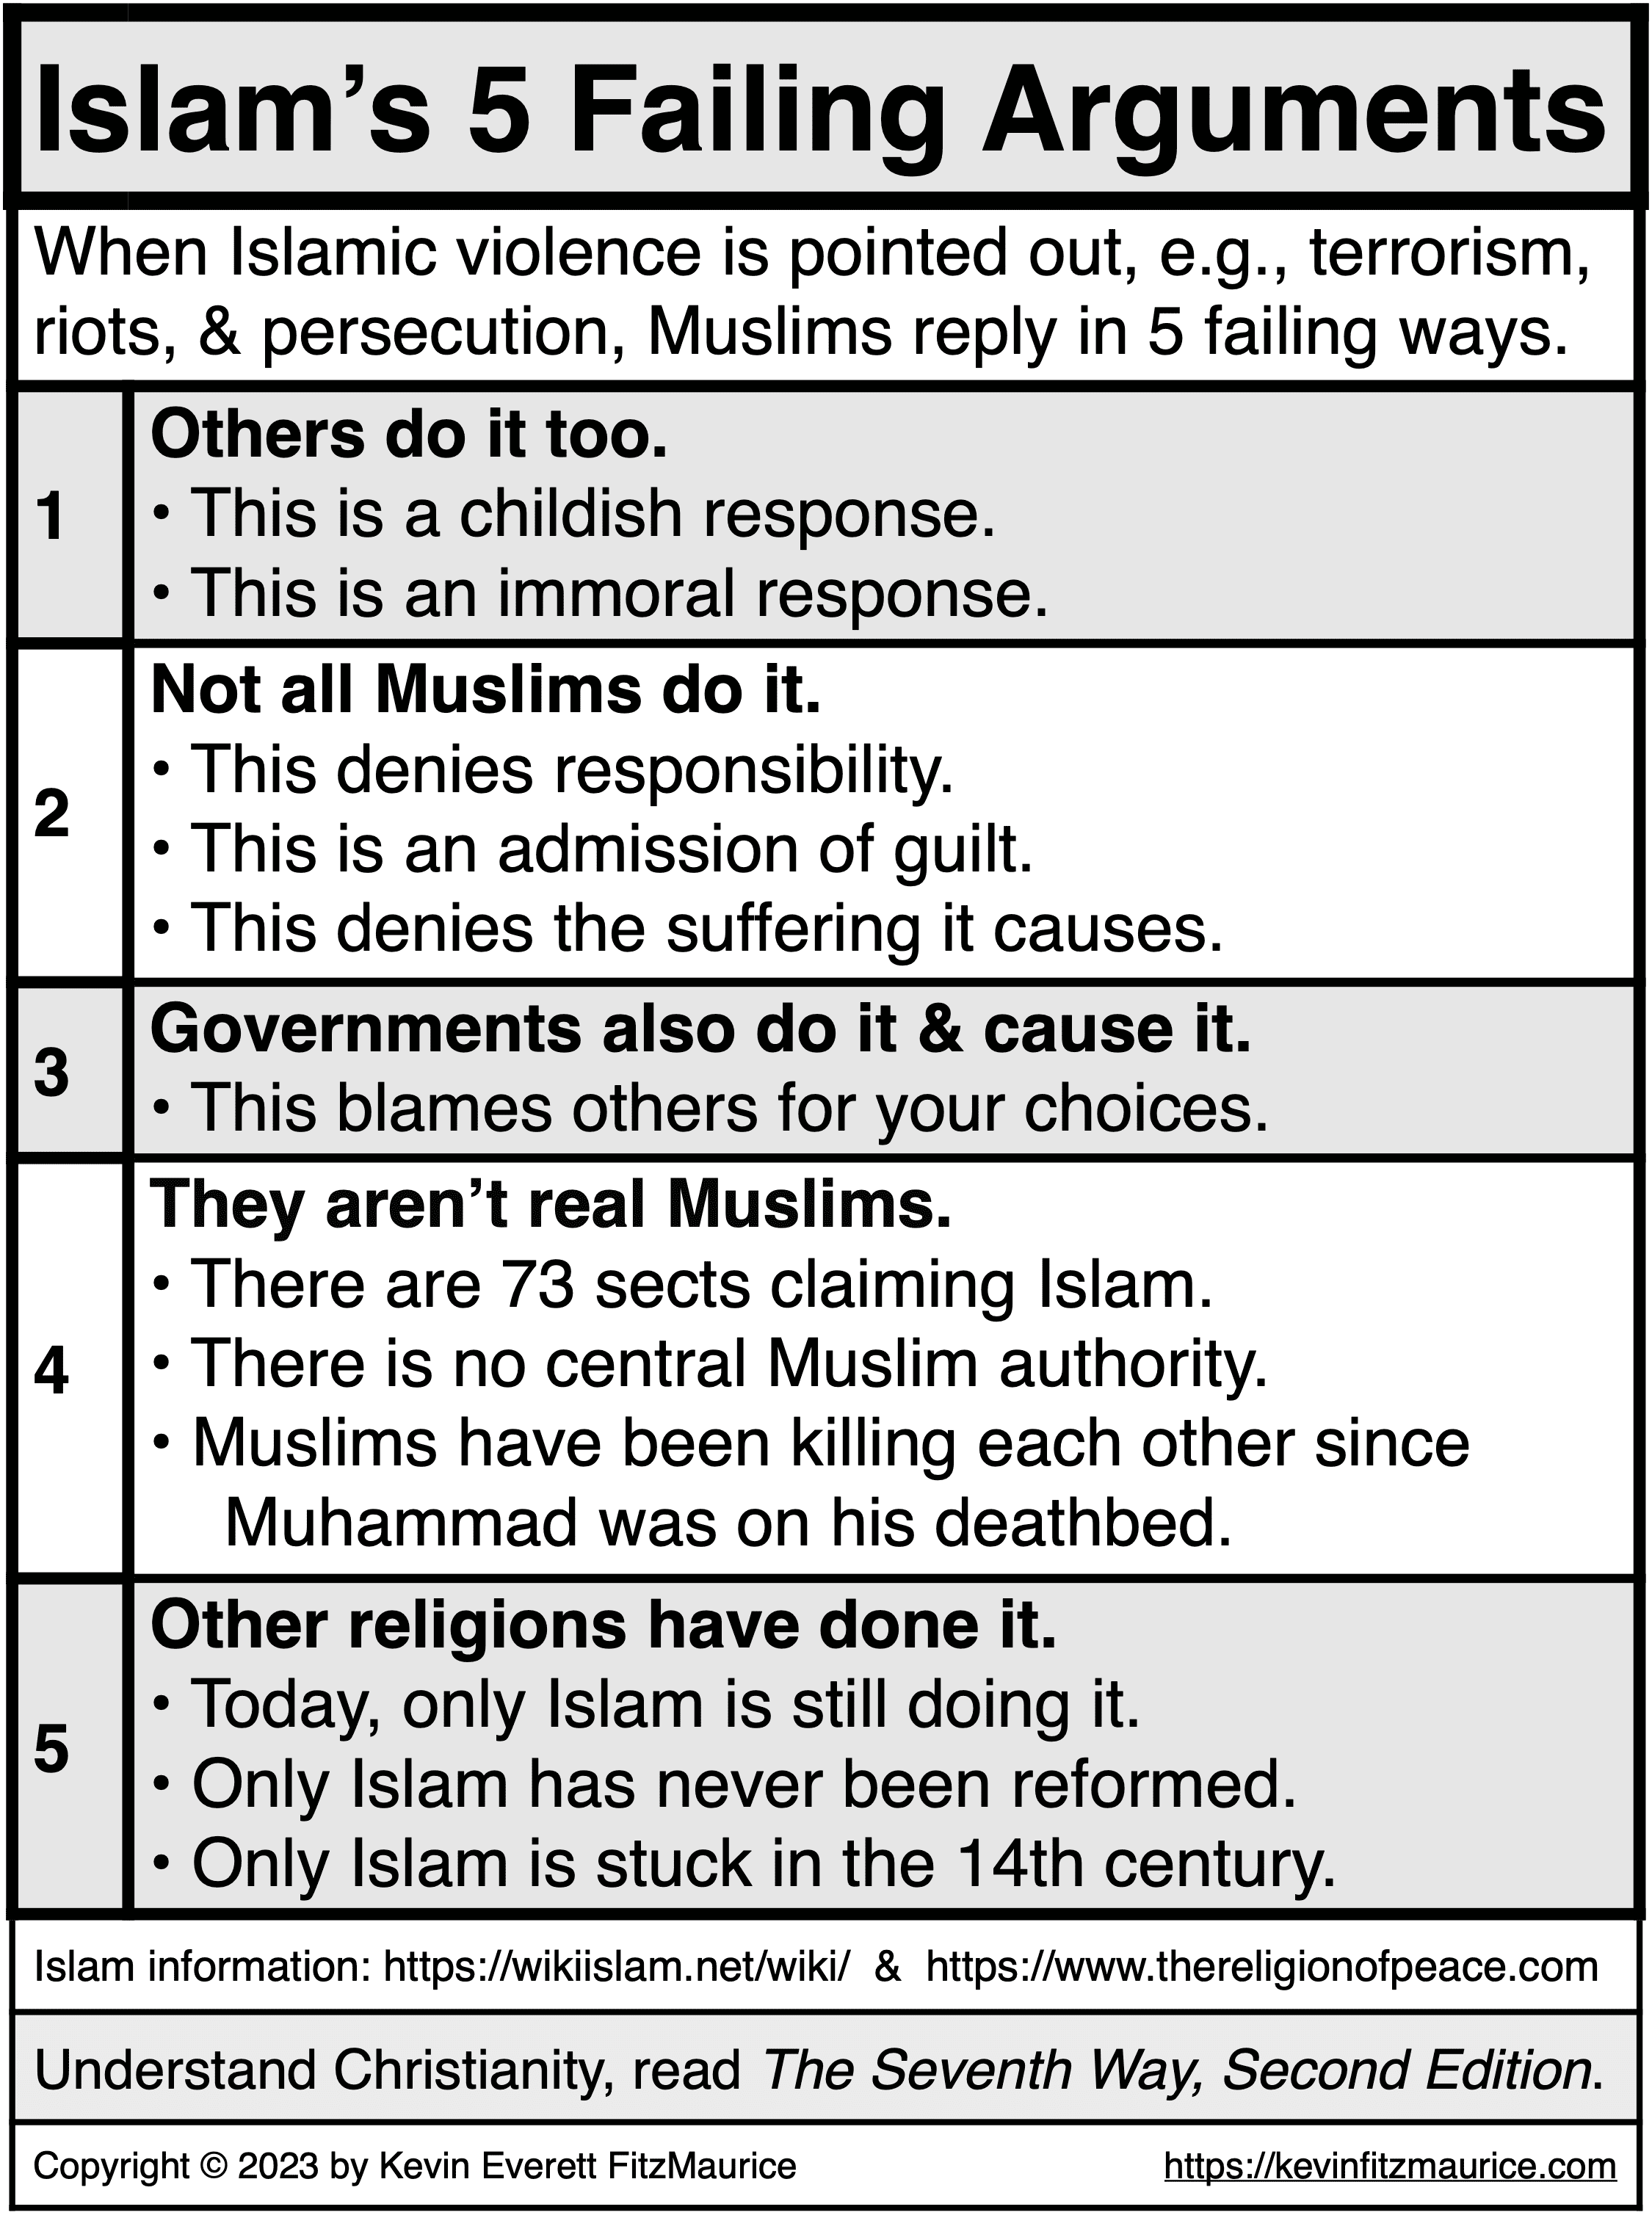 Fast-Facts Christian Sex Islam's Failing Arguments for Violence